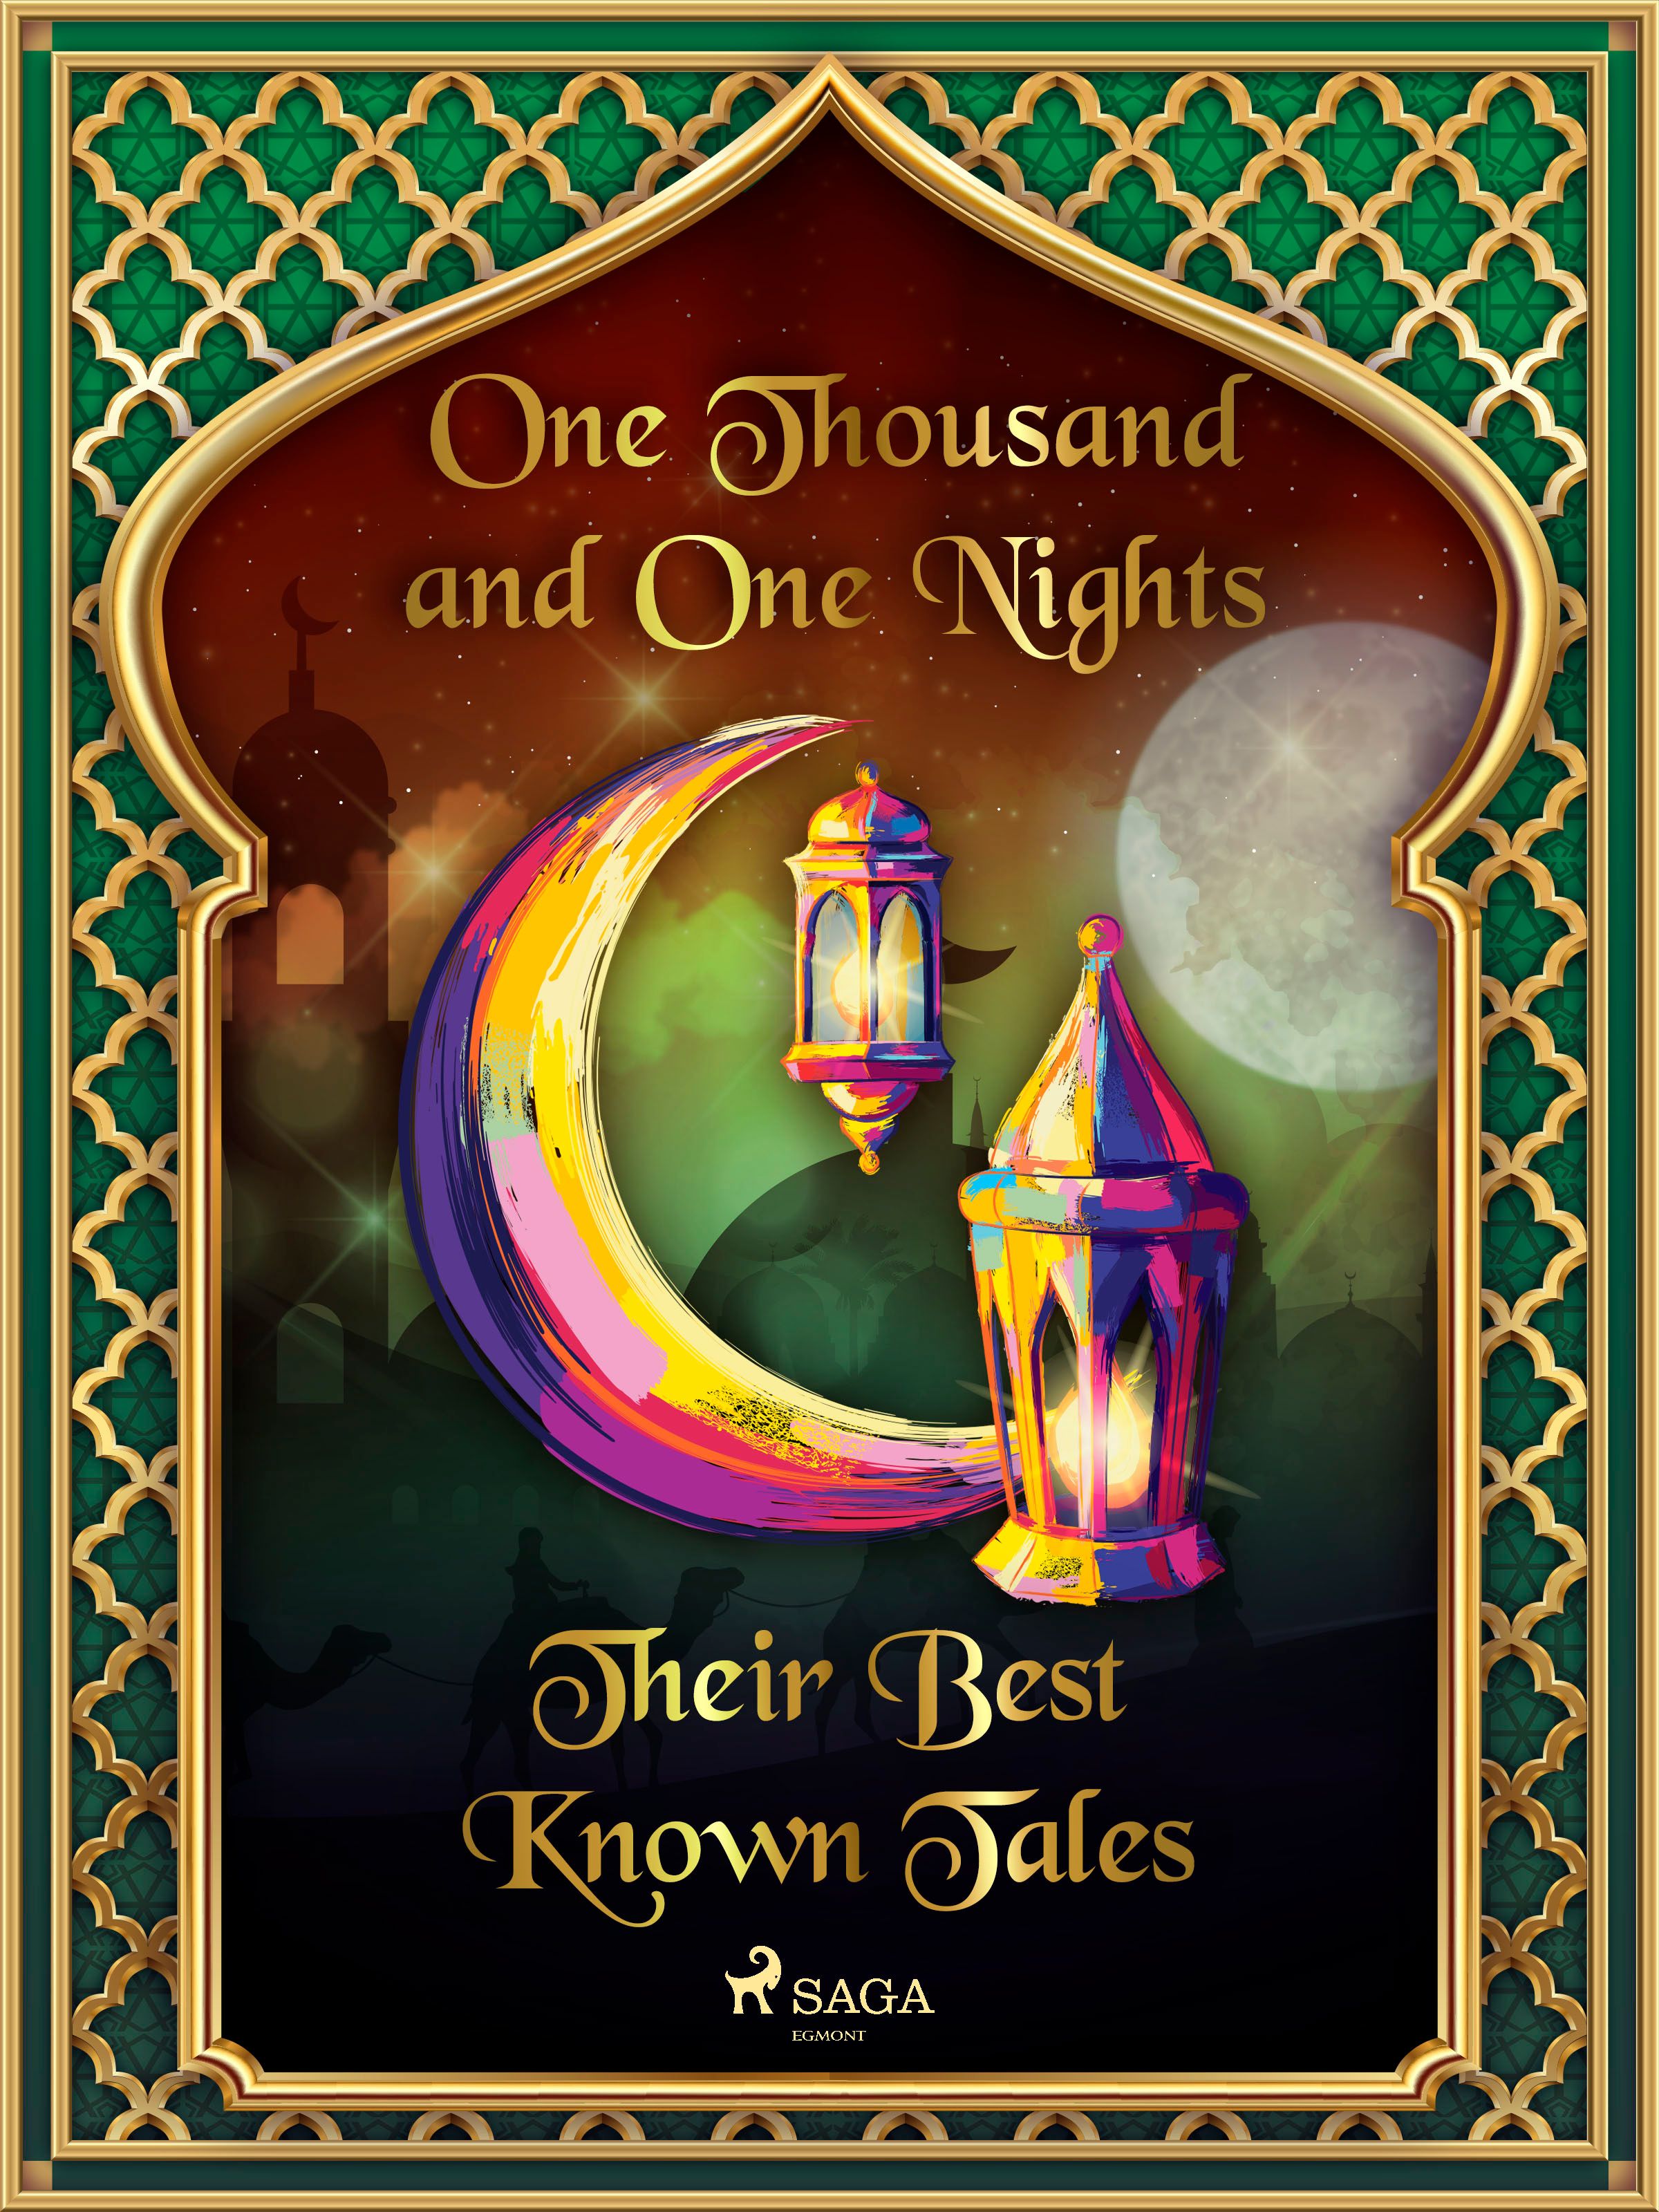 The Arabian Nights: Their Best-Known Tales, eBook by One Thousand and One Nights